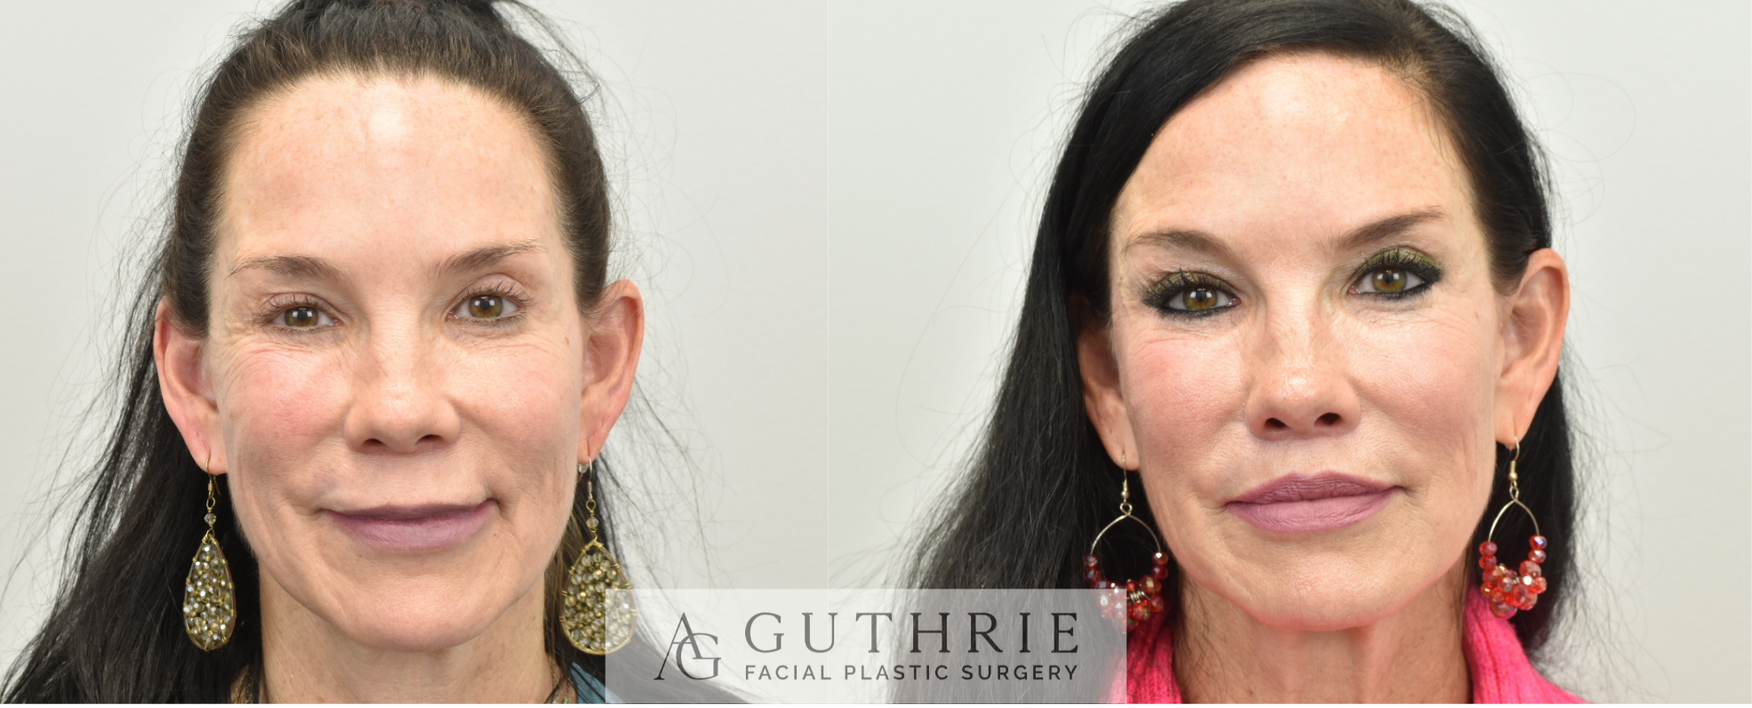 Before and After Subnasal Lip Lift, Upper and Lower Lip Implant Removal